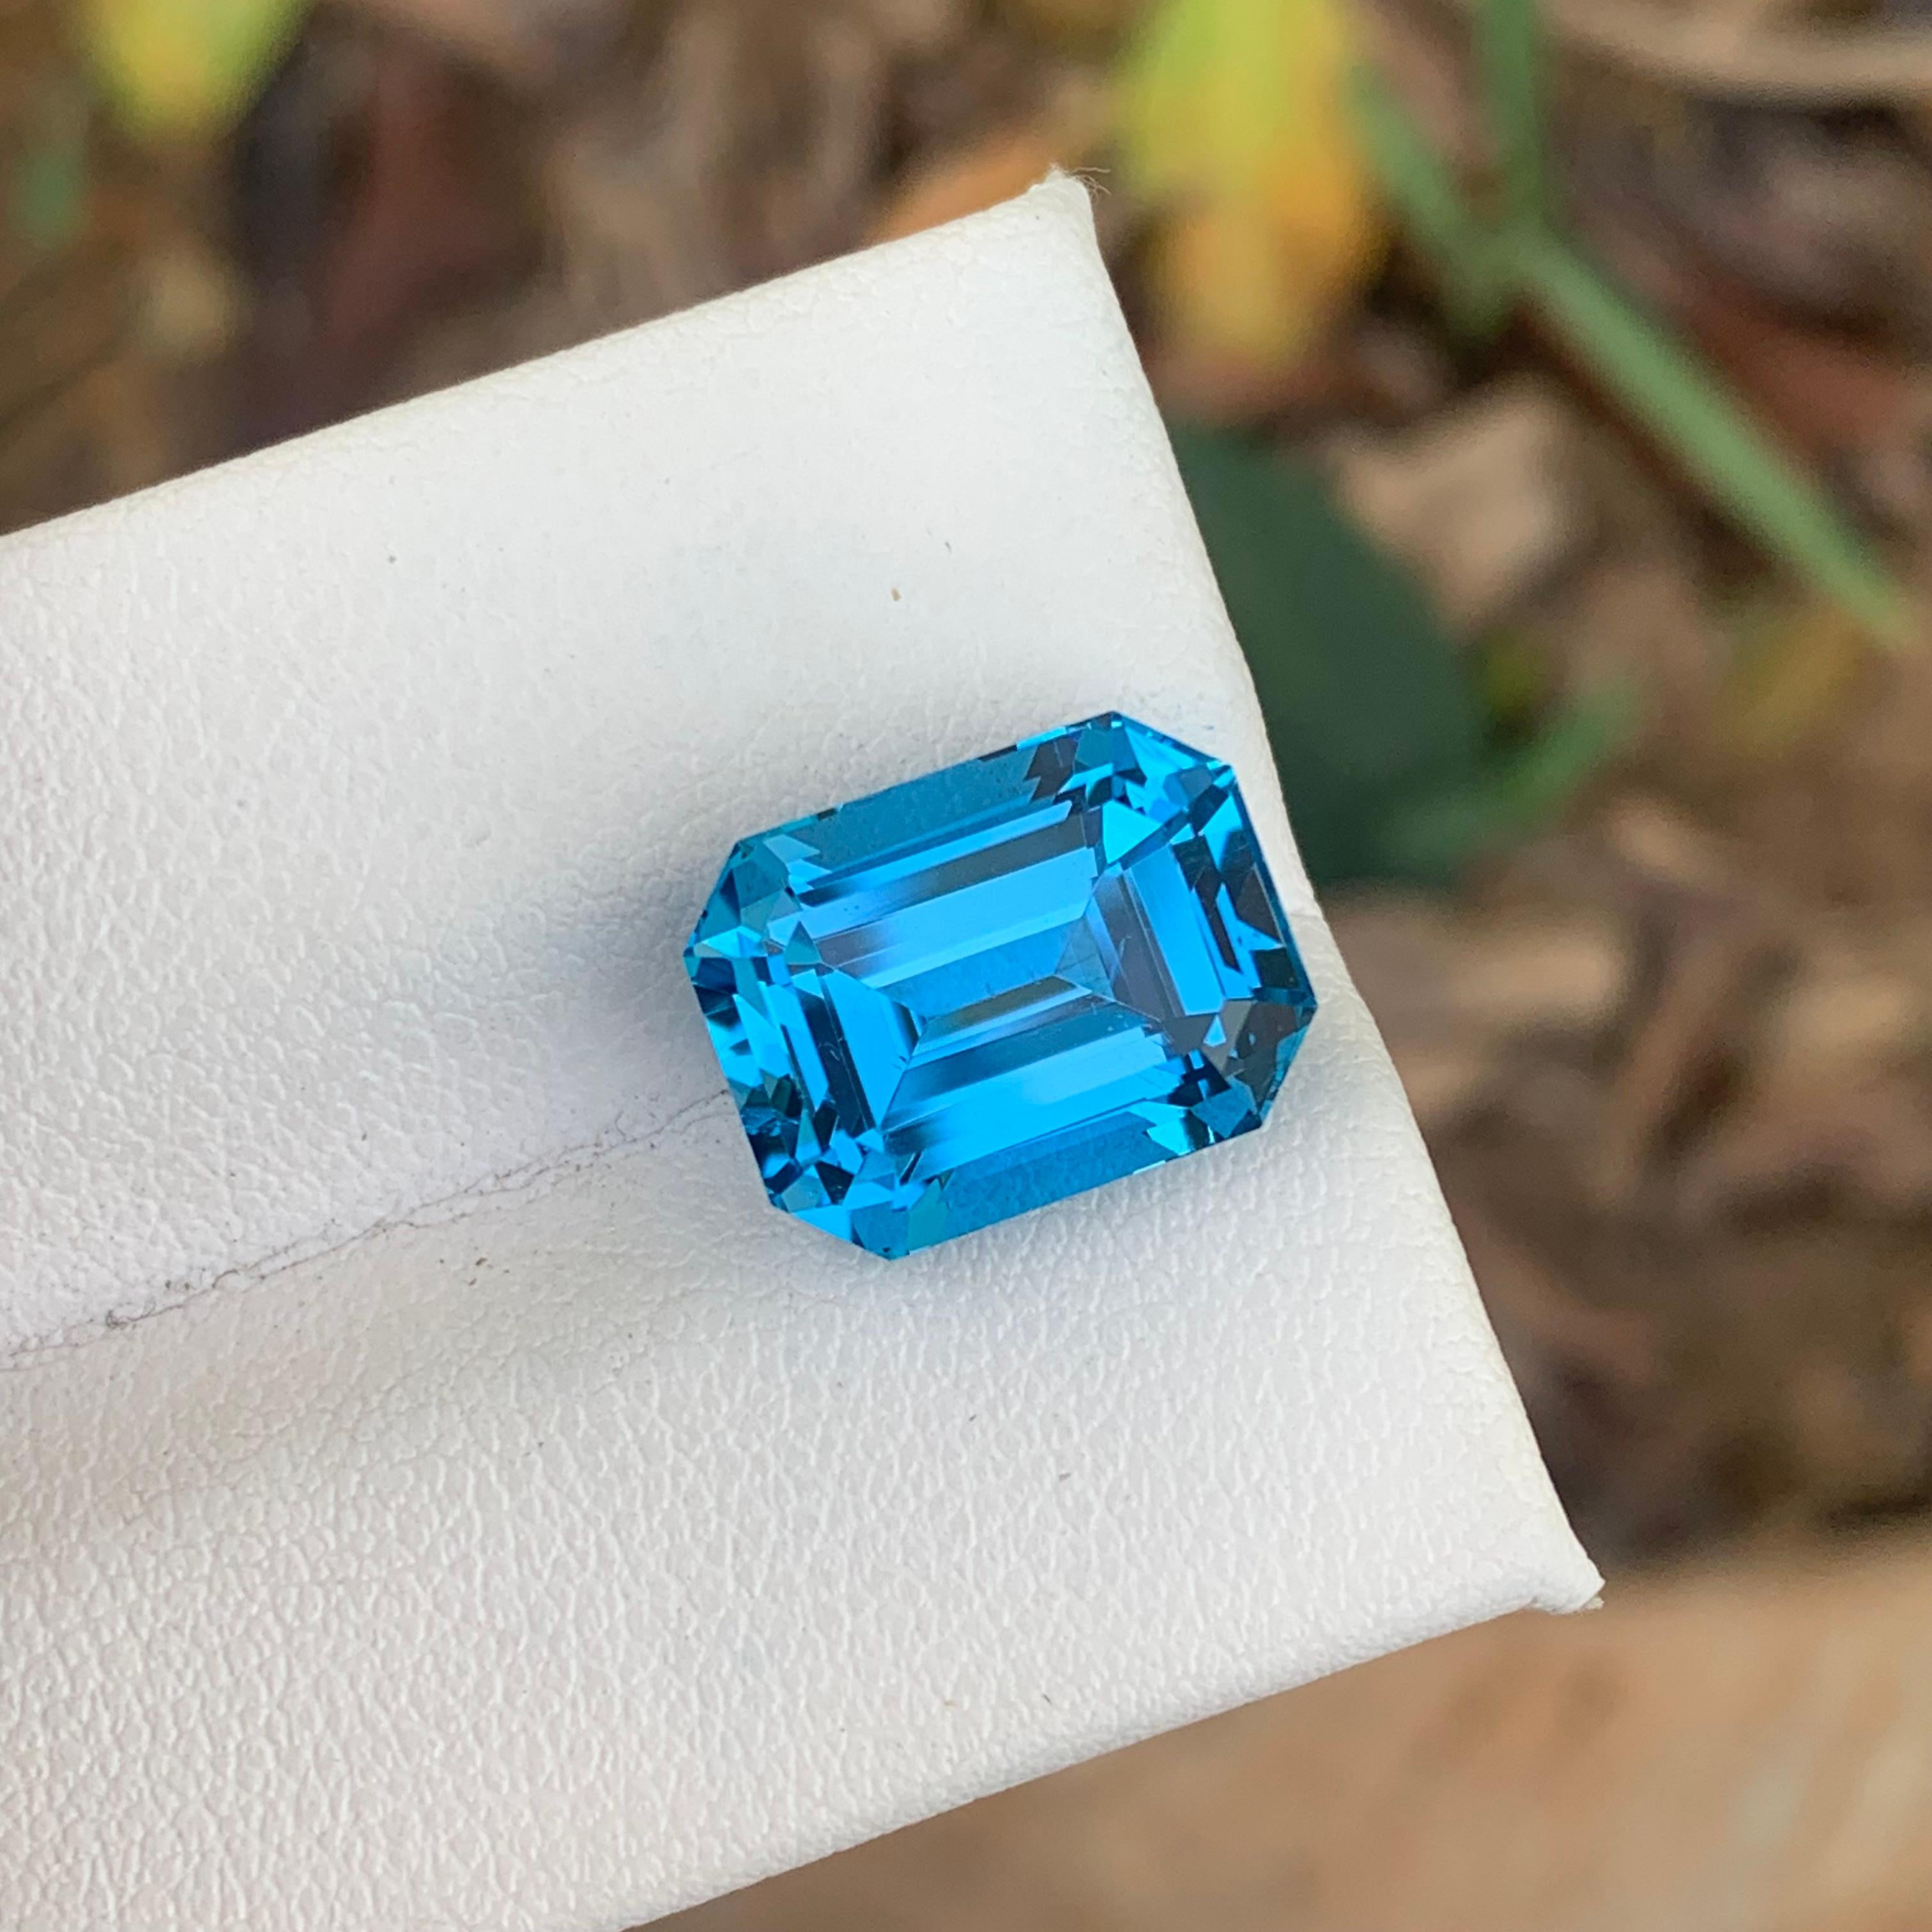 Gorgeous Intense Blue Loose Electric Blue Topaz from Brazil 9.85 Carat Ring Gem For Sale 1